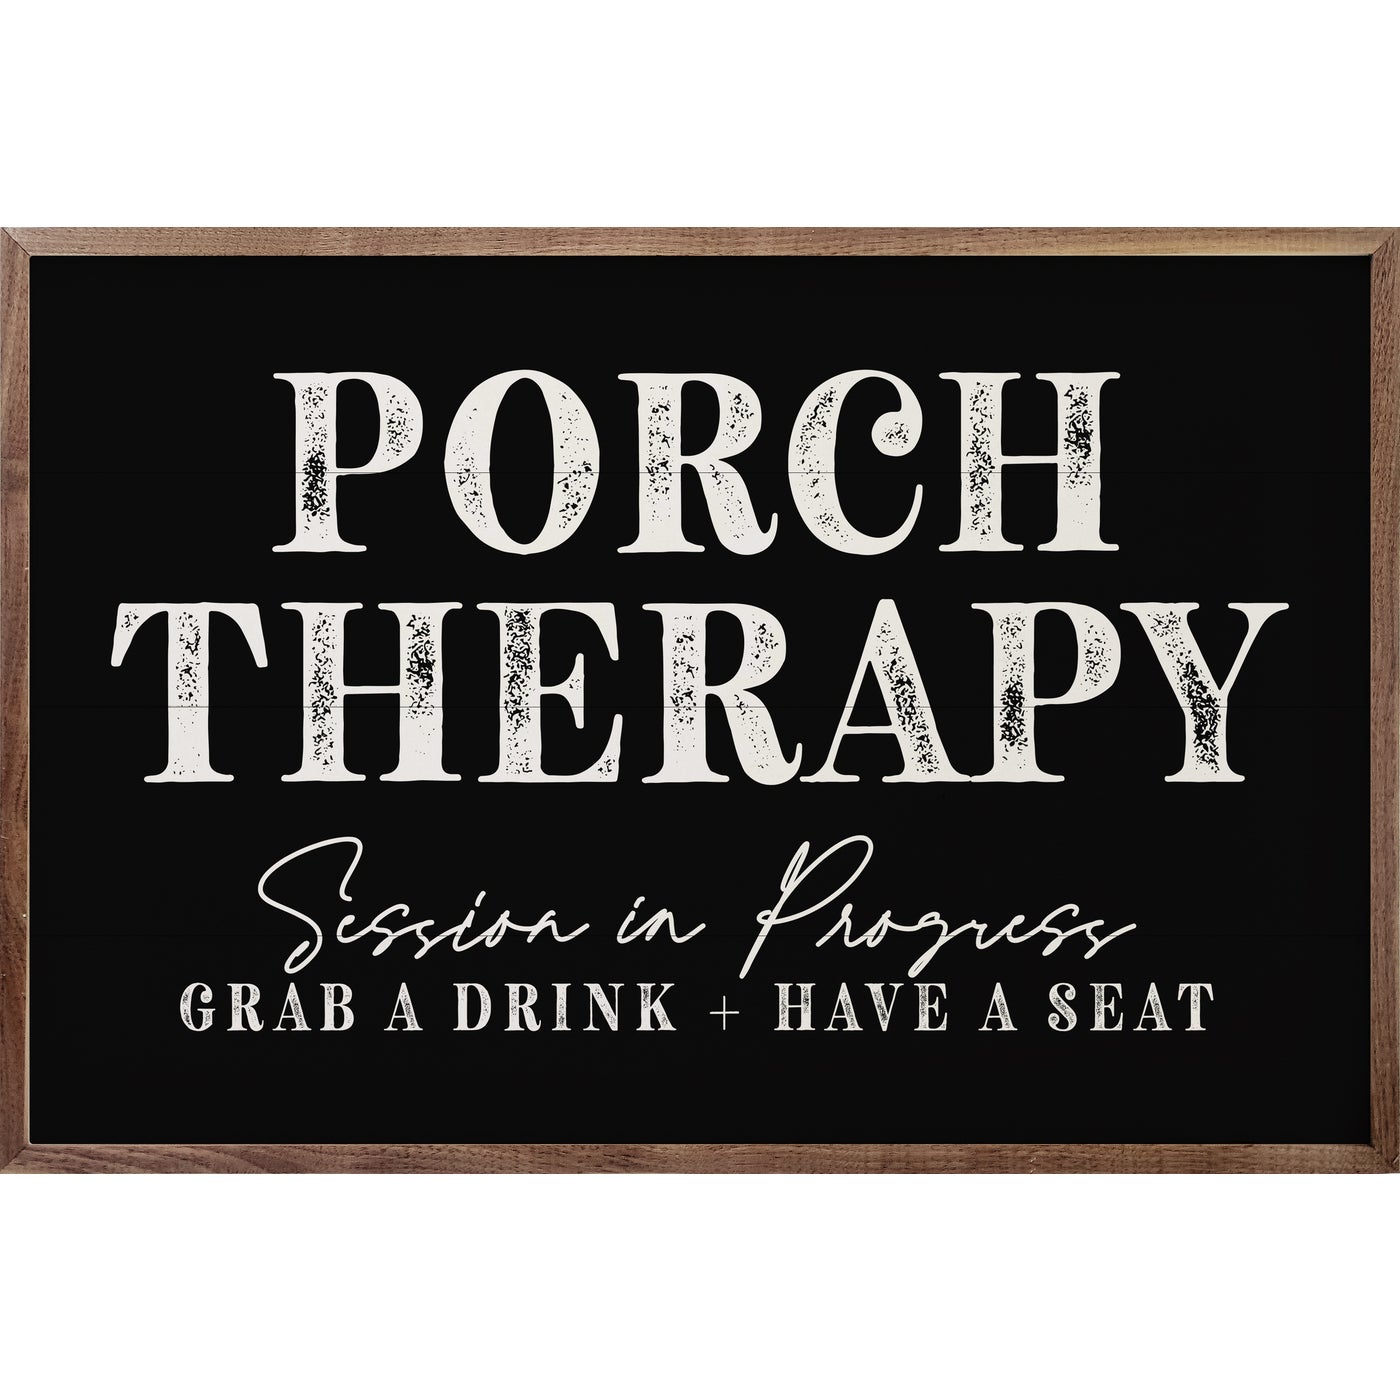 Porch Therapy Session In Progress Wood Framed Print